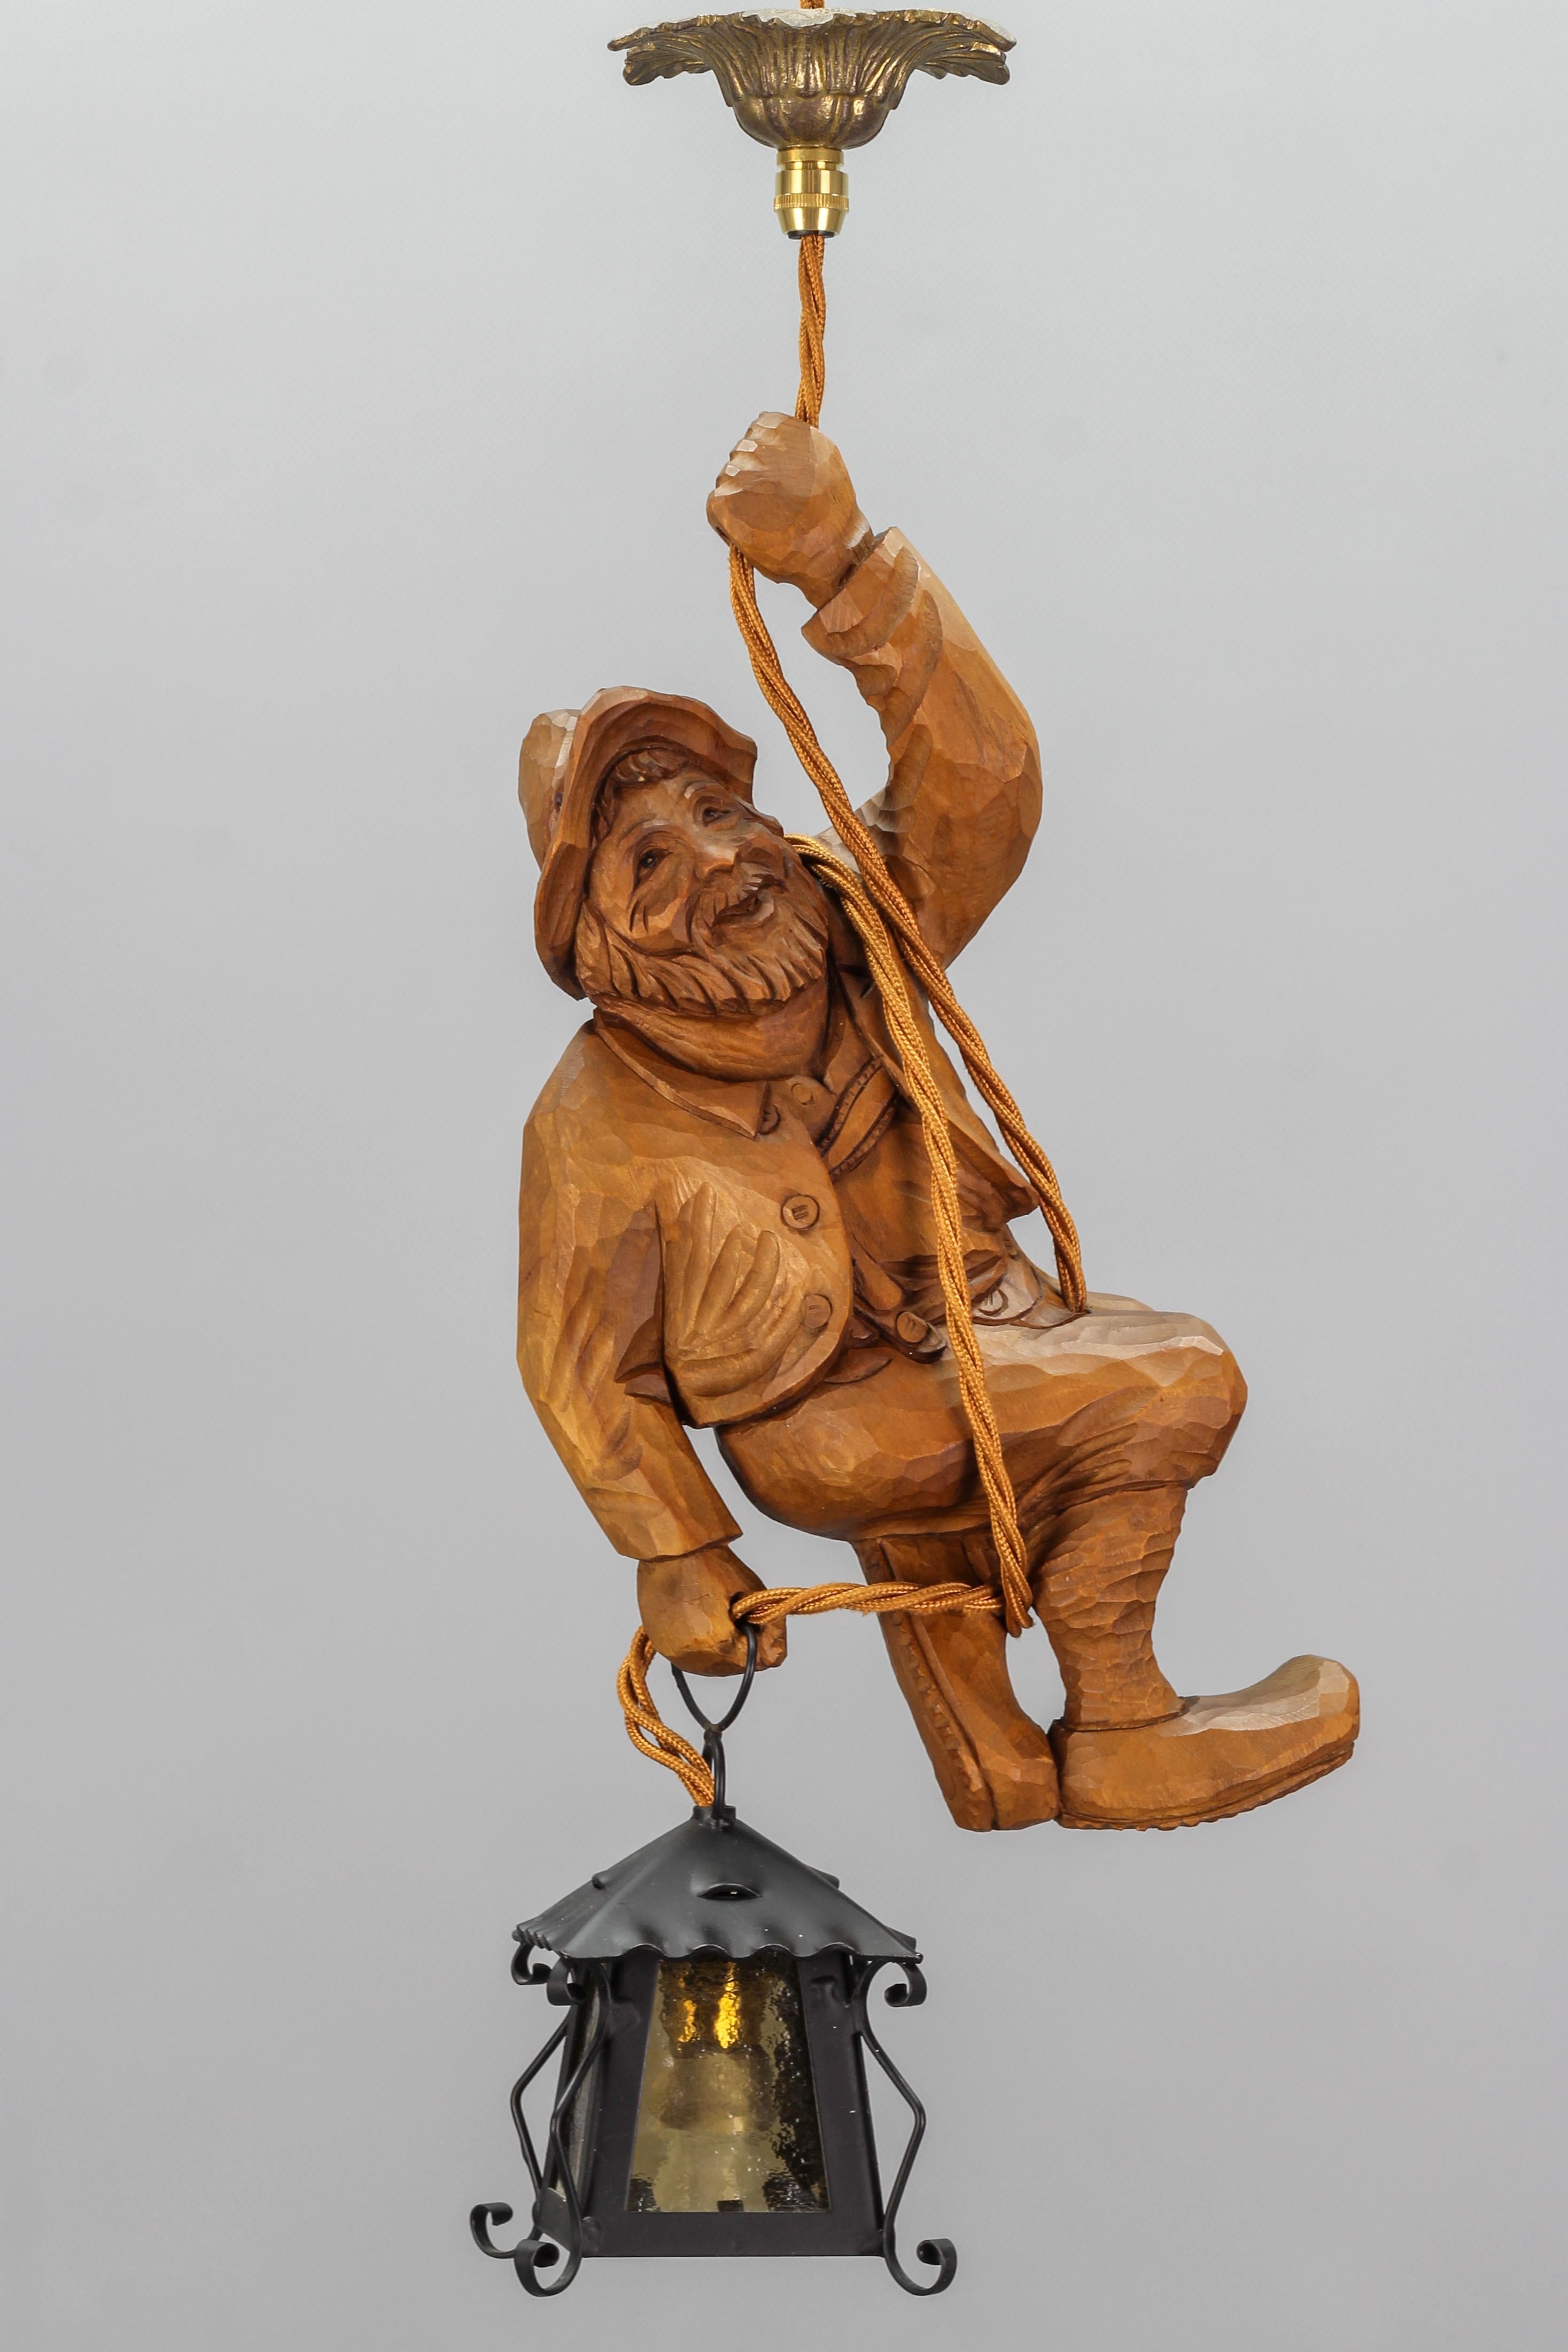 This delightful German figural pendant light features a hand-carved linden-wood figure of a smiling and warm-hearted mountaineer. The detailed carved wooden mountaineer is holding onto a rope and holding a lantern in one hand. The figure is in light